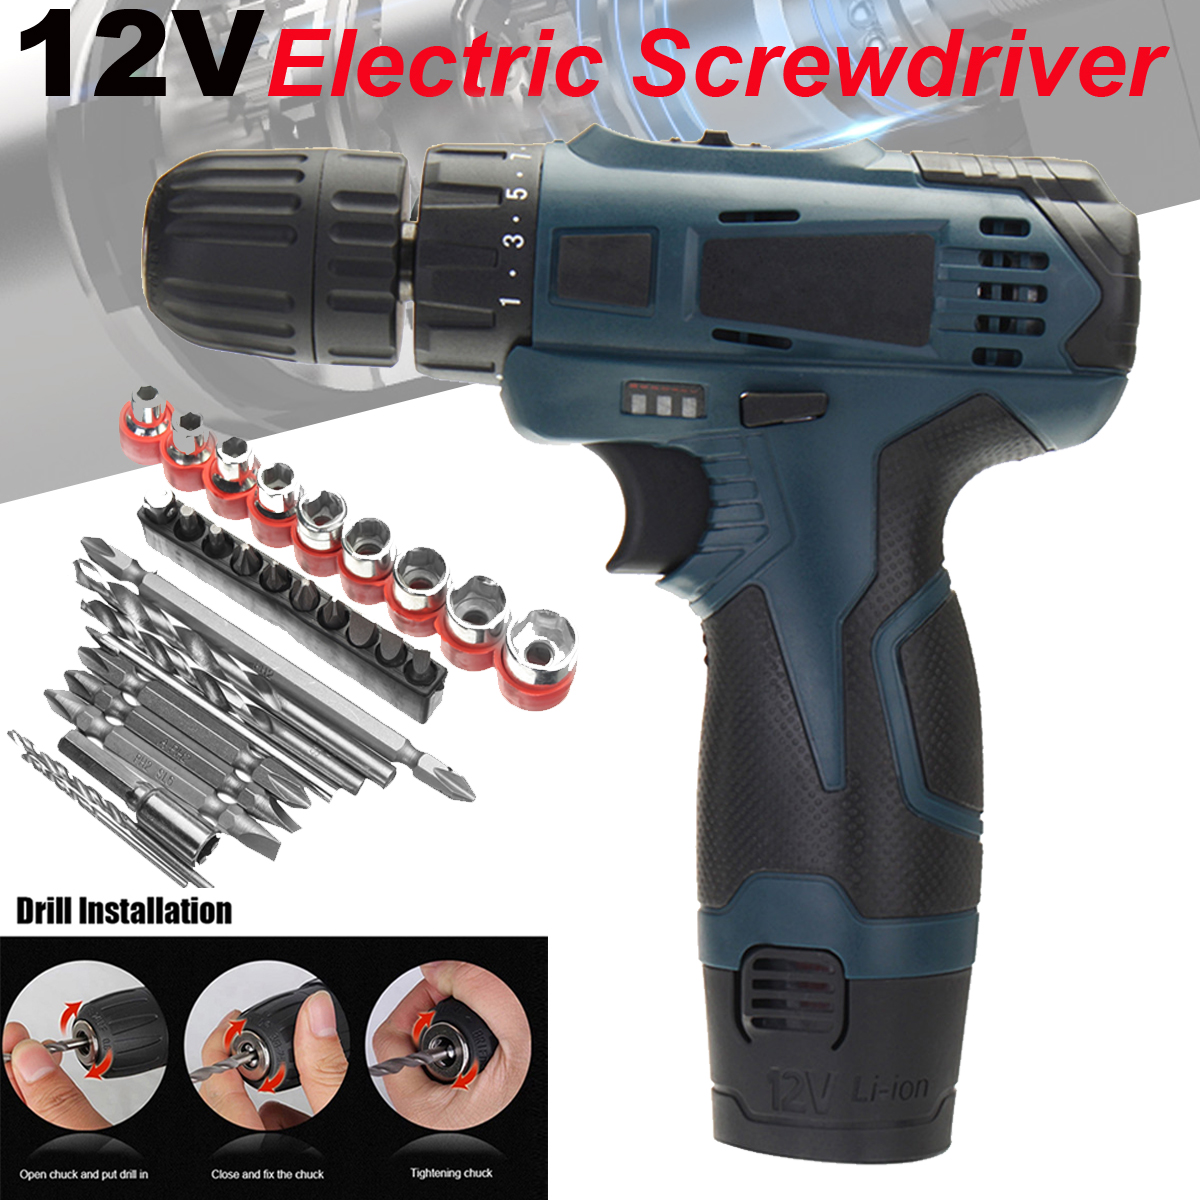 12V-Li-Ion-Cordless-Electric-Screwdriver-Power-Drill-Driver-Hand-Accessories-Kit-2-Speed-LED-Light-1284861-1